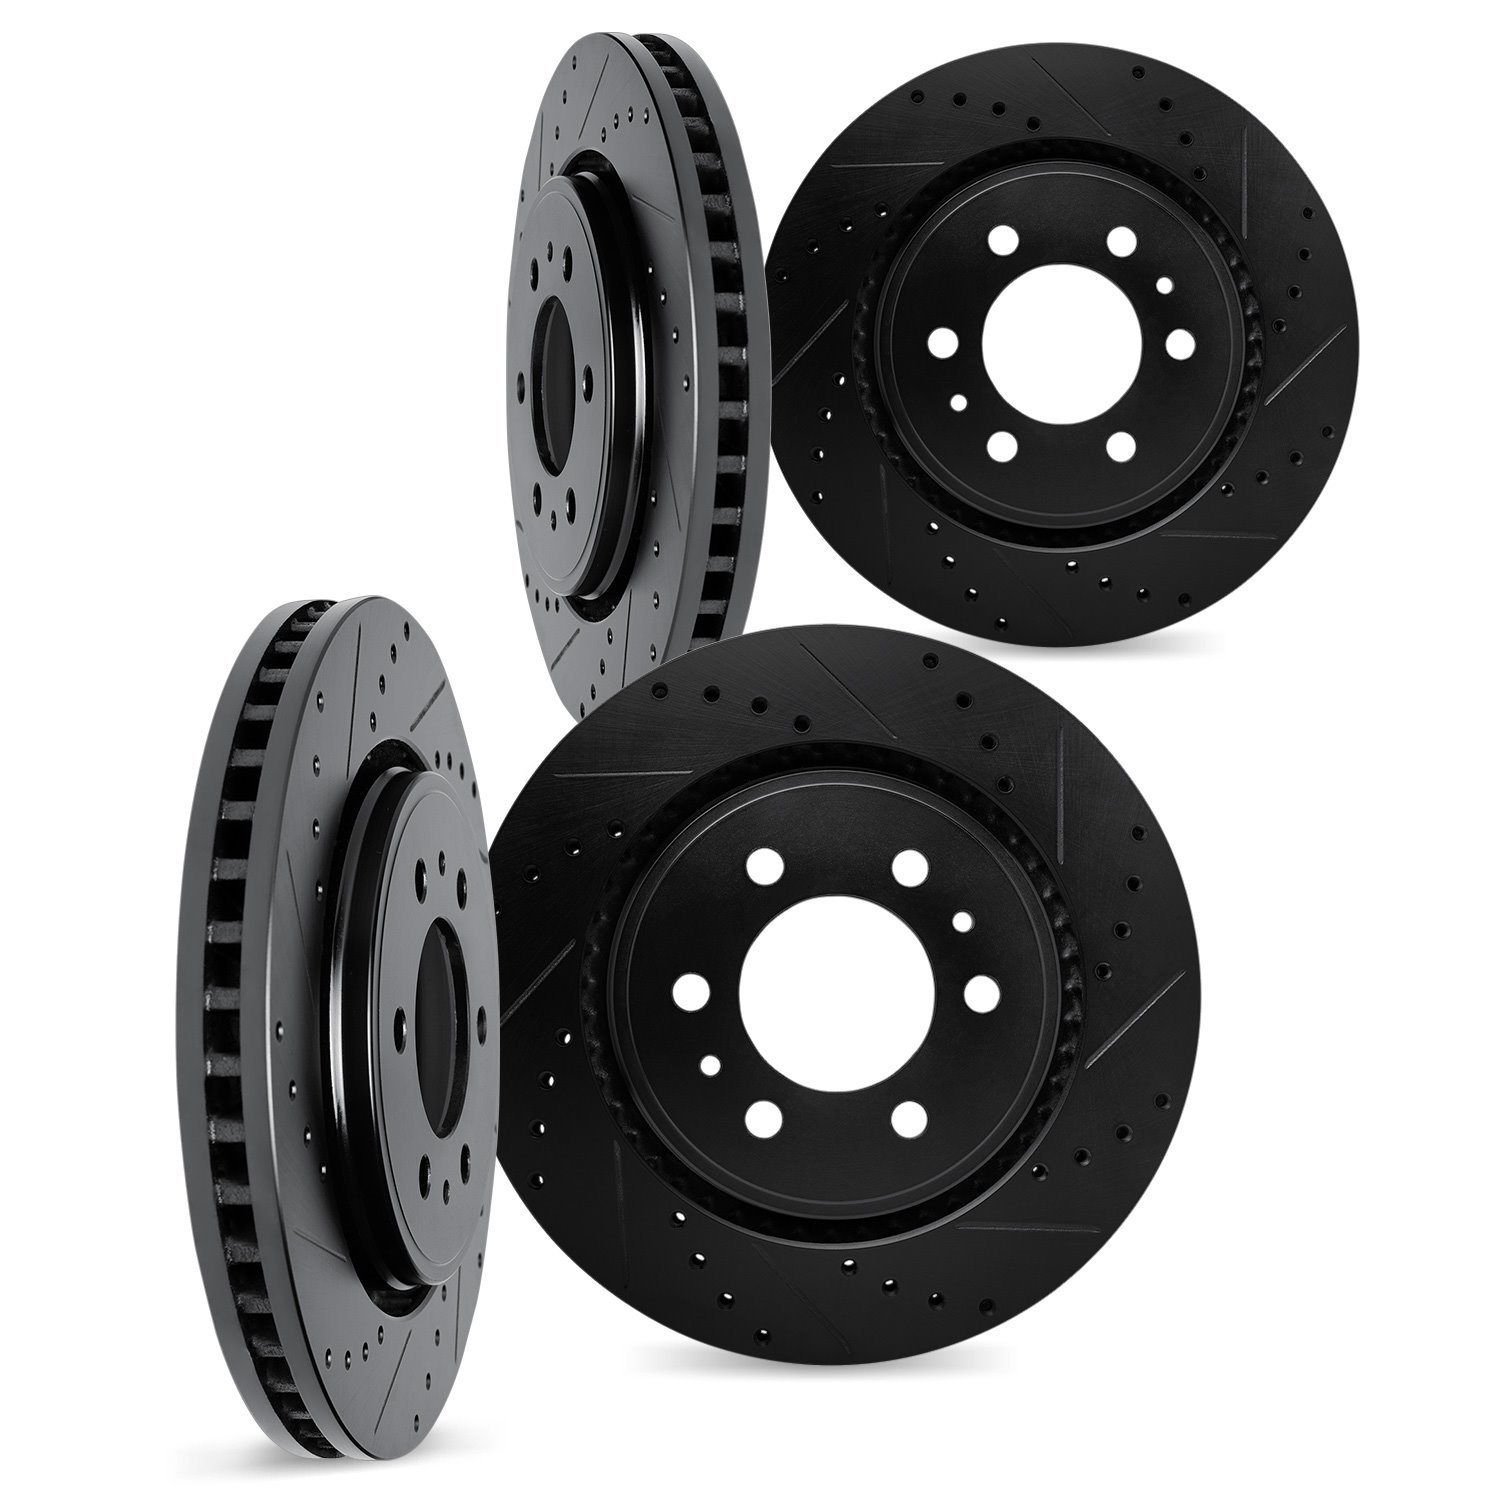 8004-48011 Drilled/Slotted Brake Rotors [Black], 1999-2007 GM, Position: Front and Rear